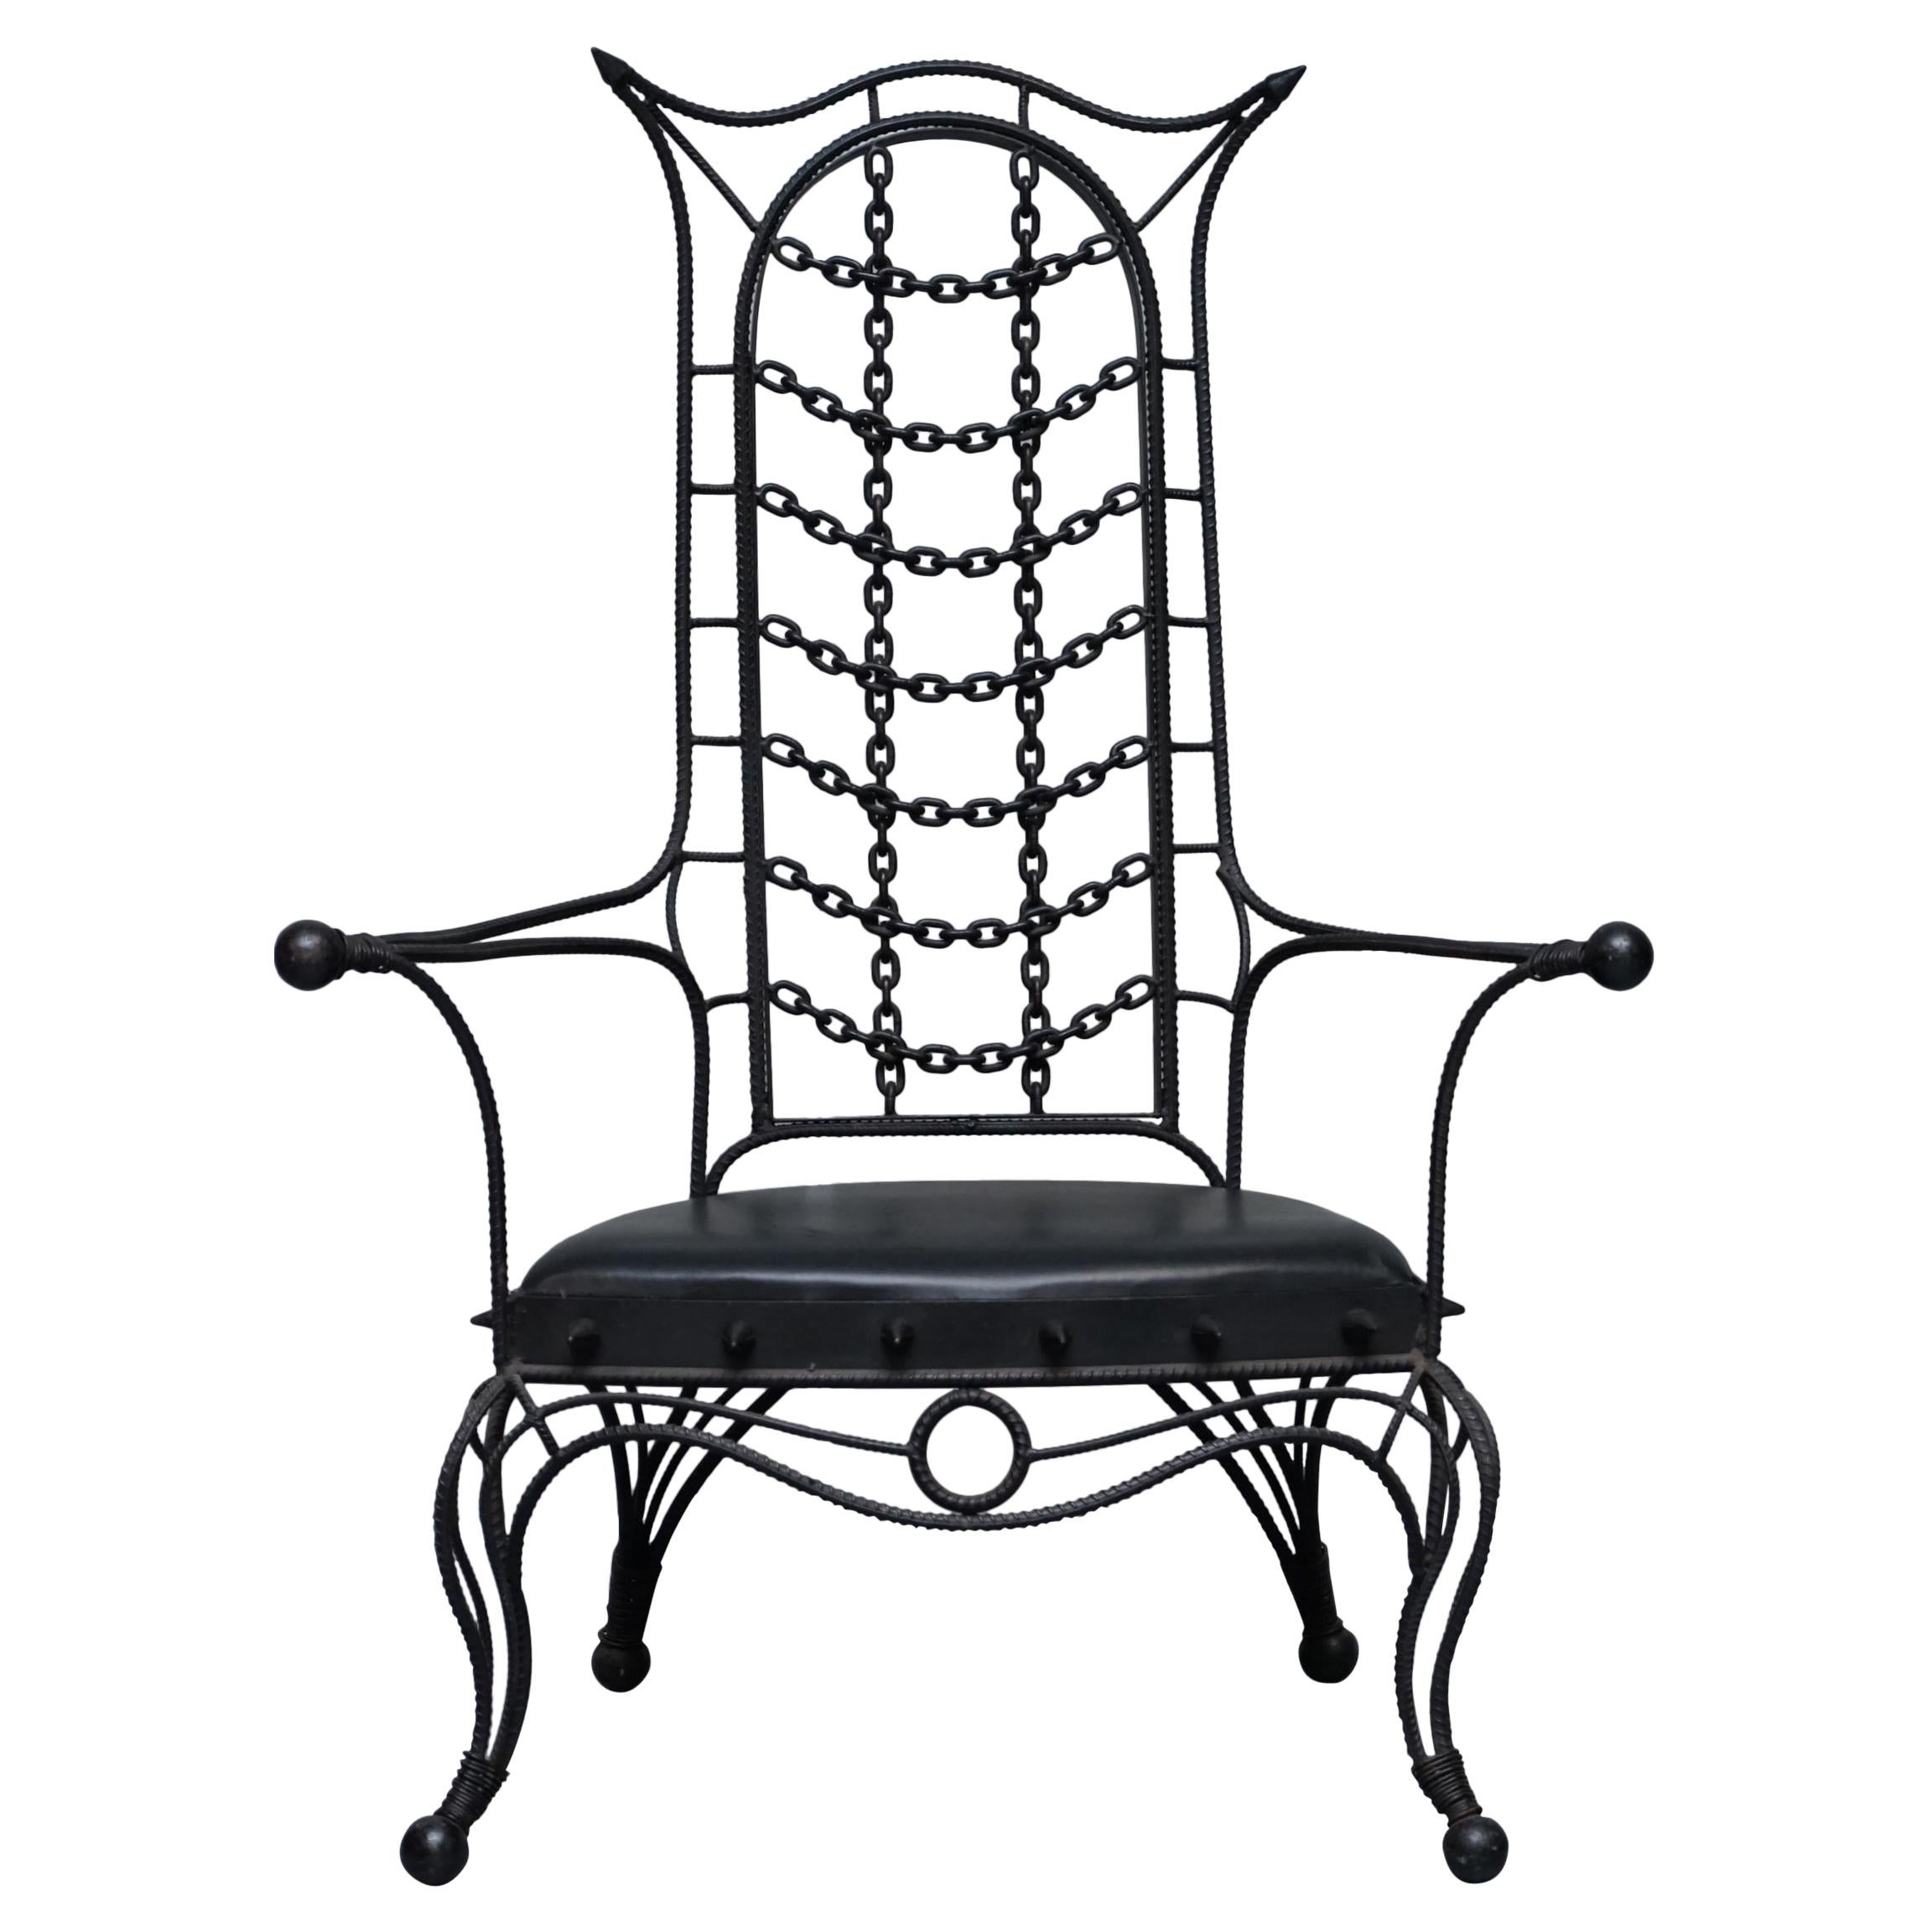 Interesting Iron Workers Gothic Sexy Dungeon Iron Throne Armchair Part Suite en vente